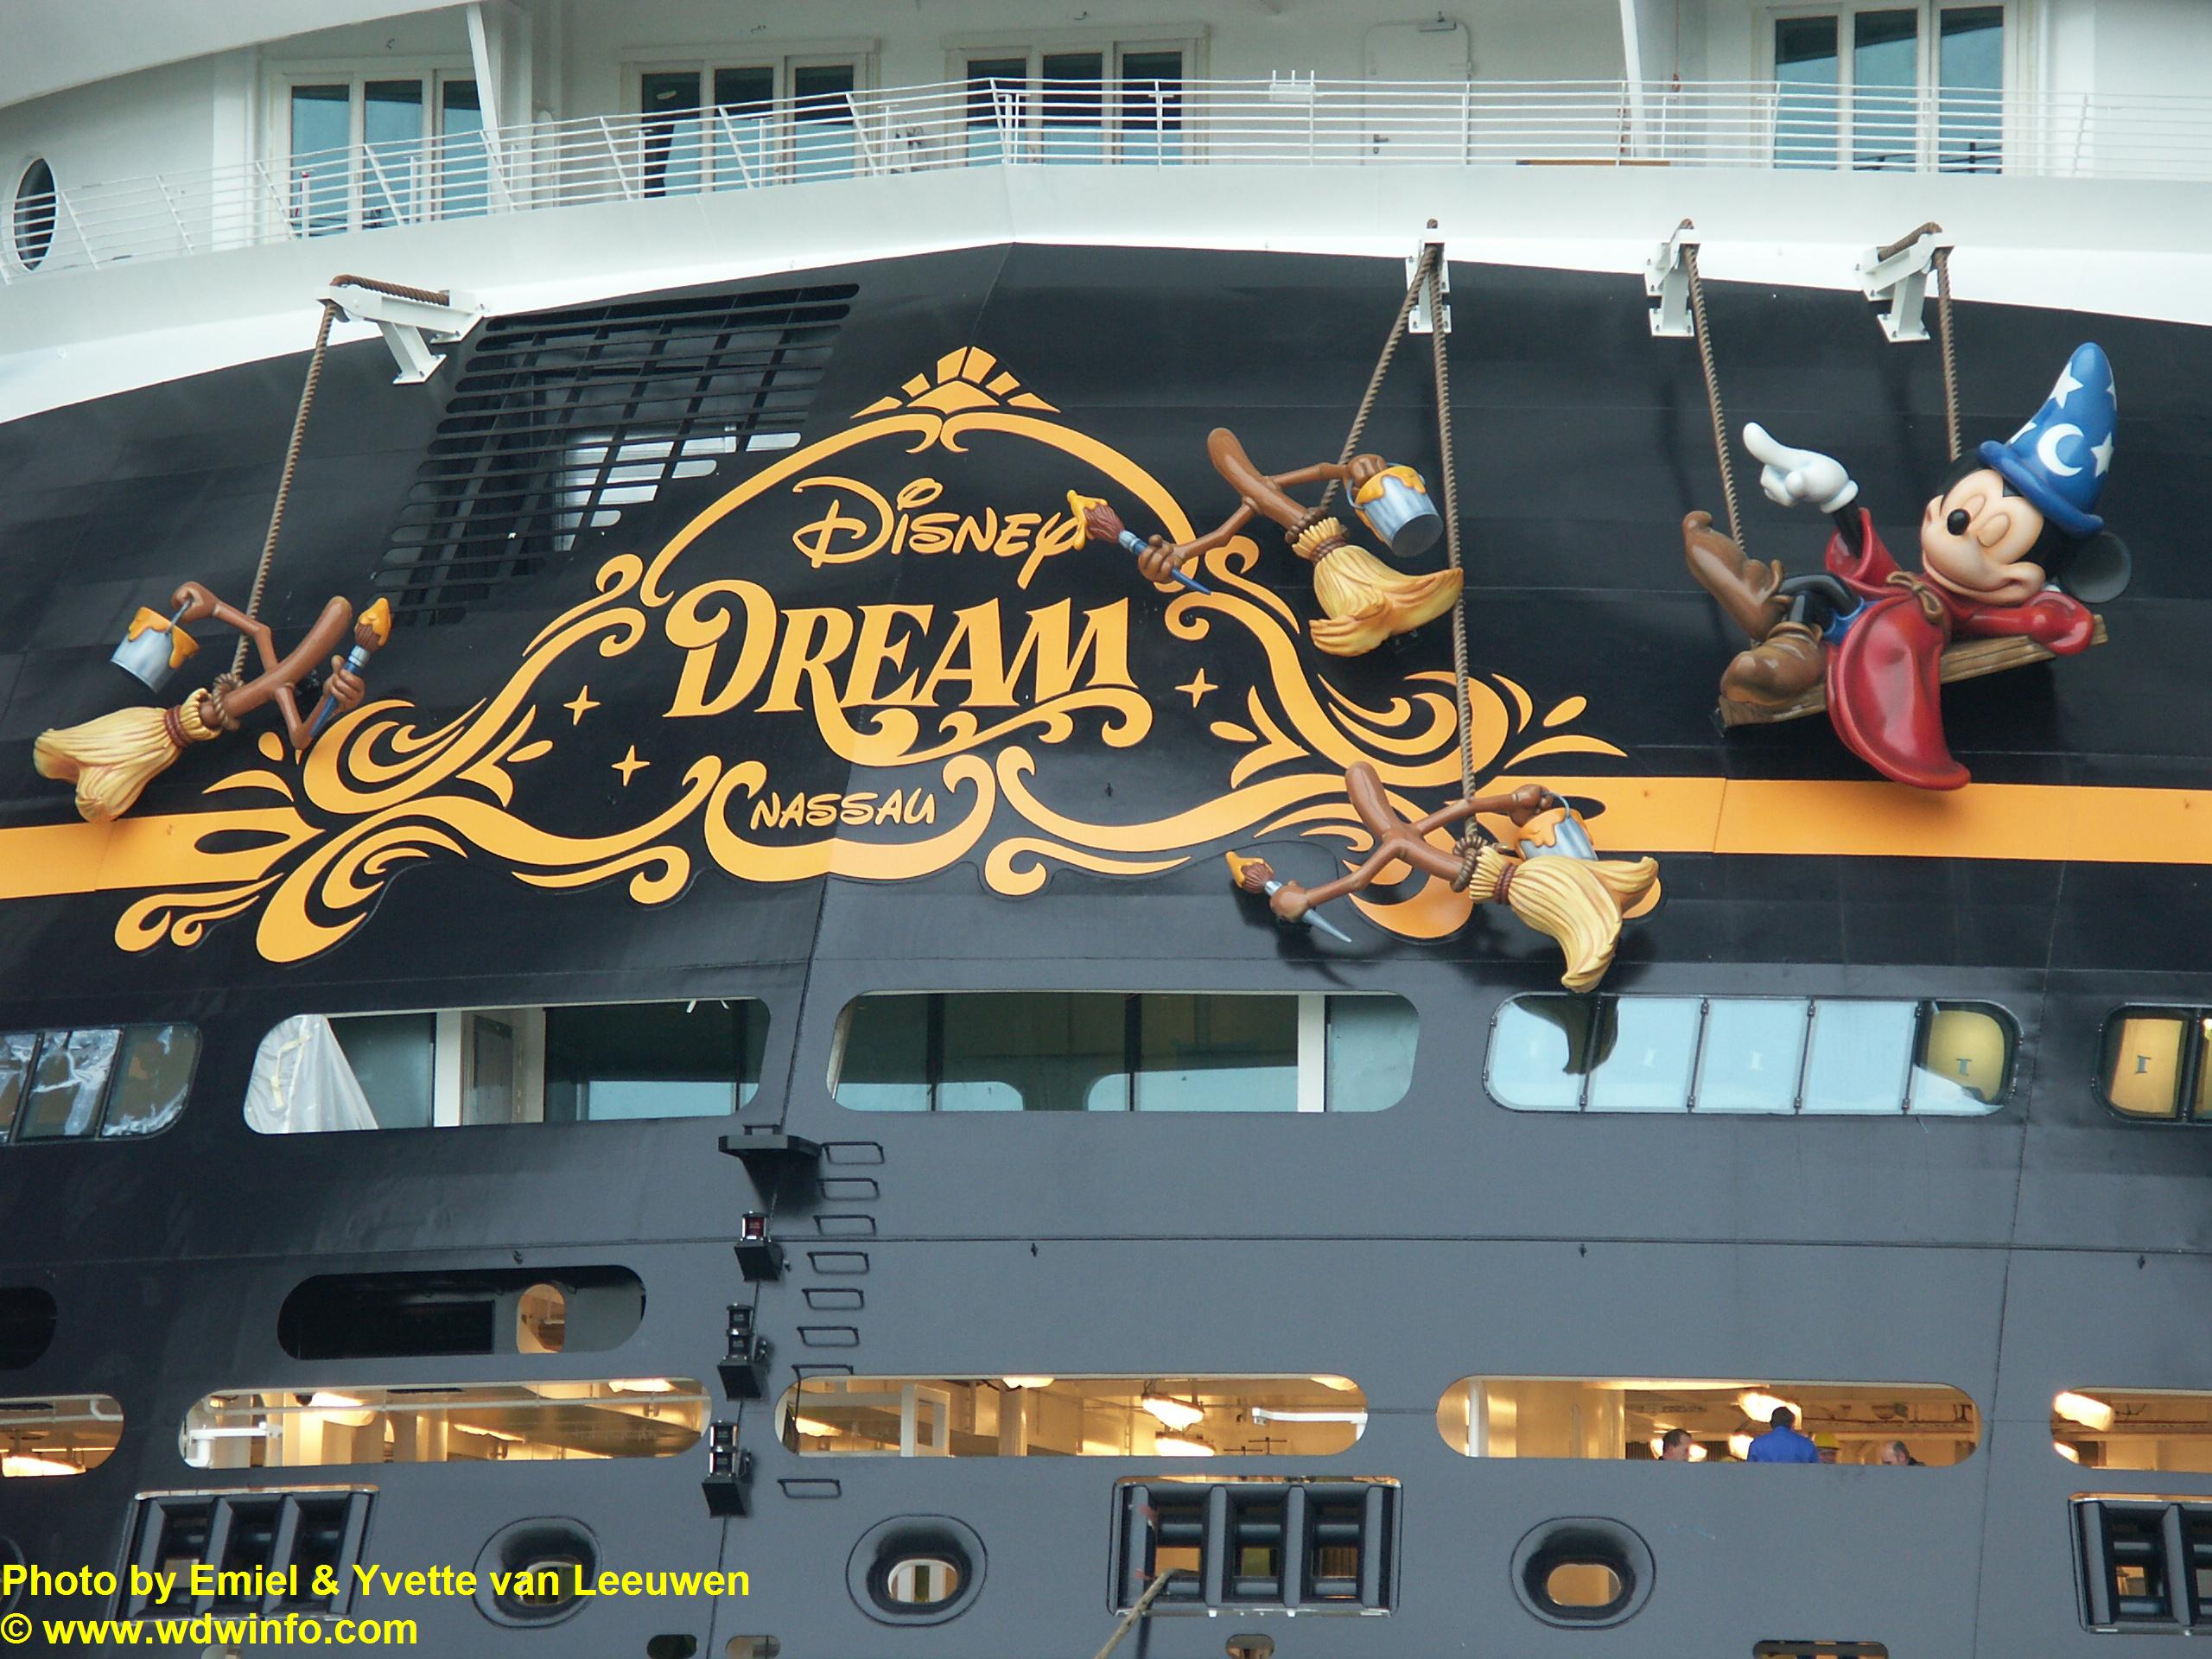 Videos: Disney Dream Floats Out in a Storm, A Media Storm, That Is